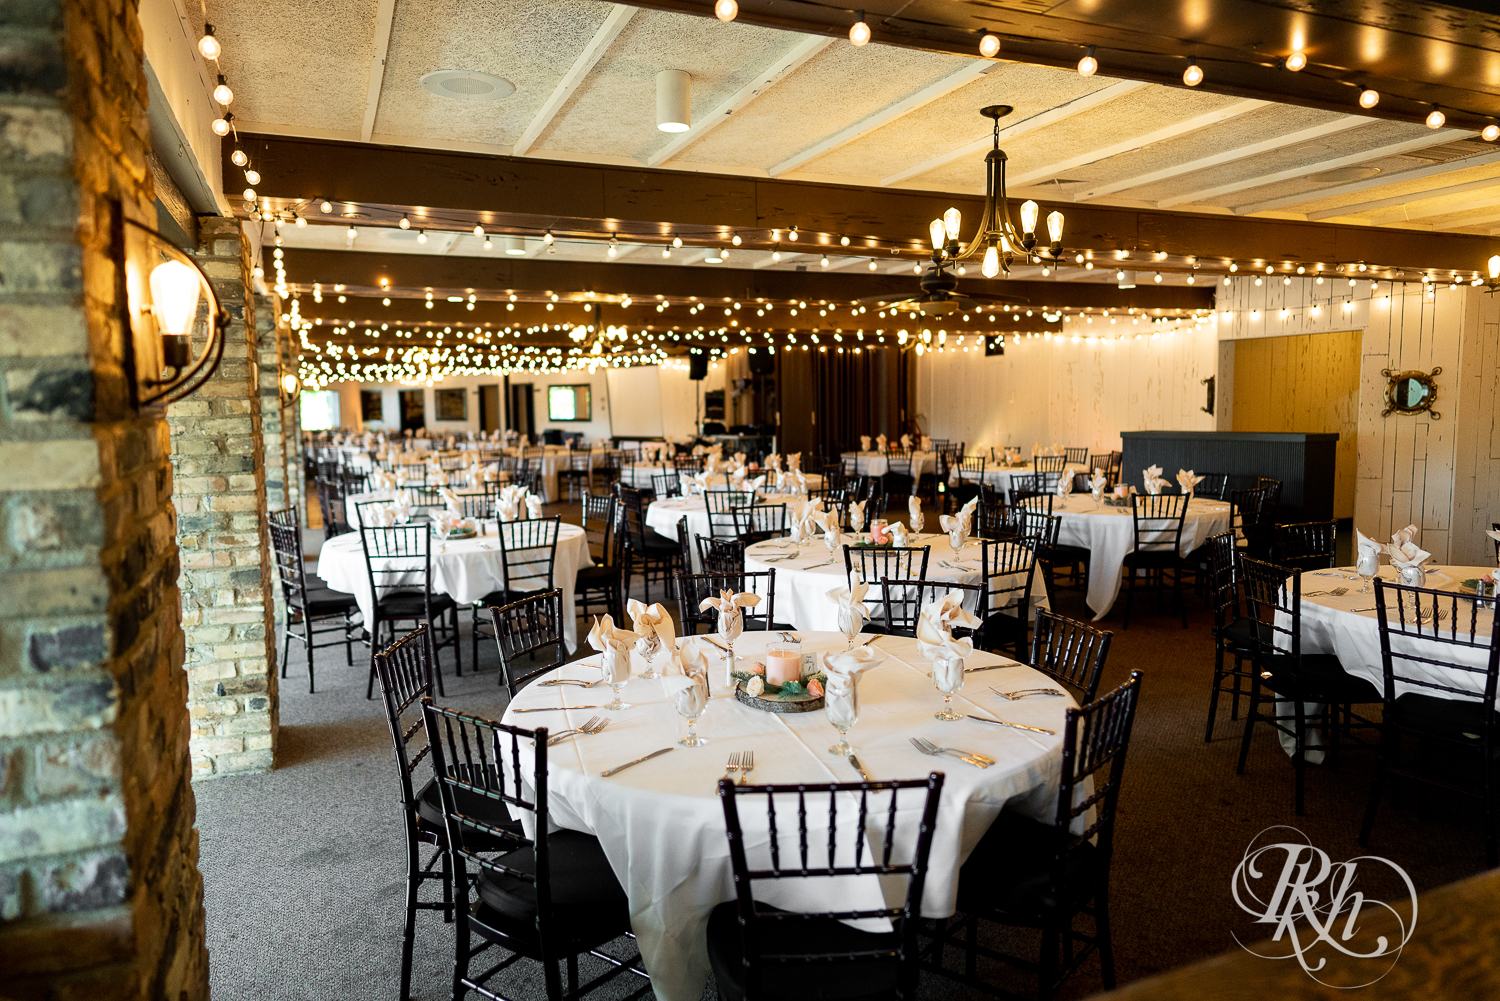 Wedding reception setup at The Chart House in Lakeville, Minnesota.